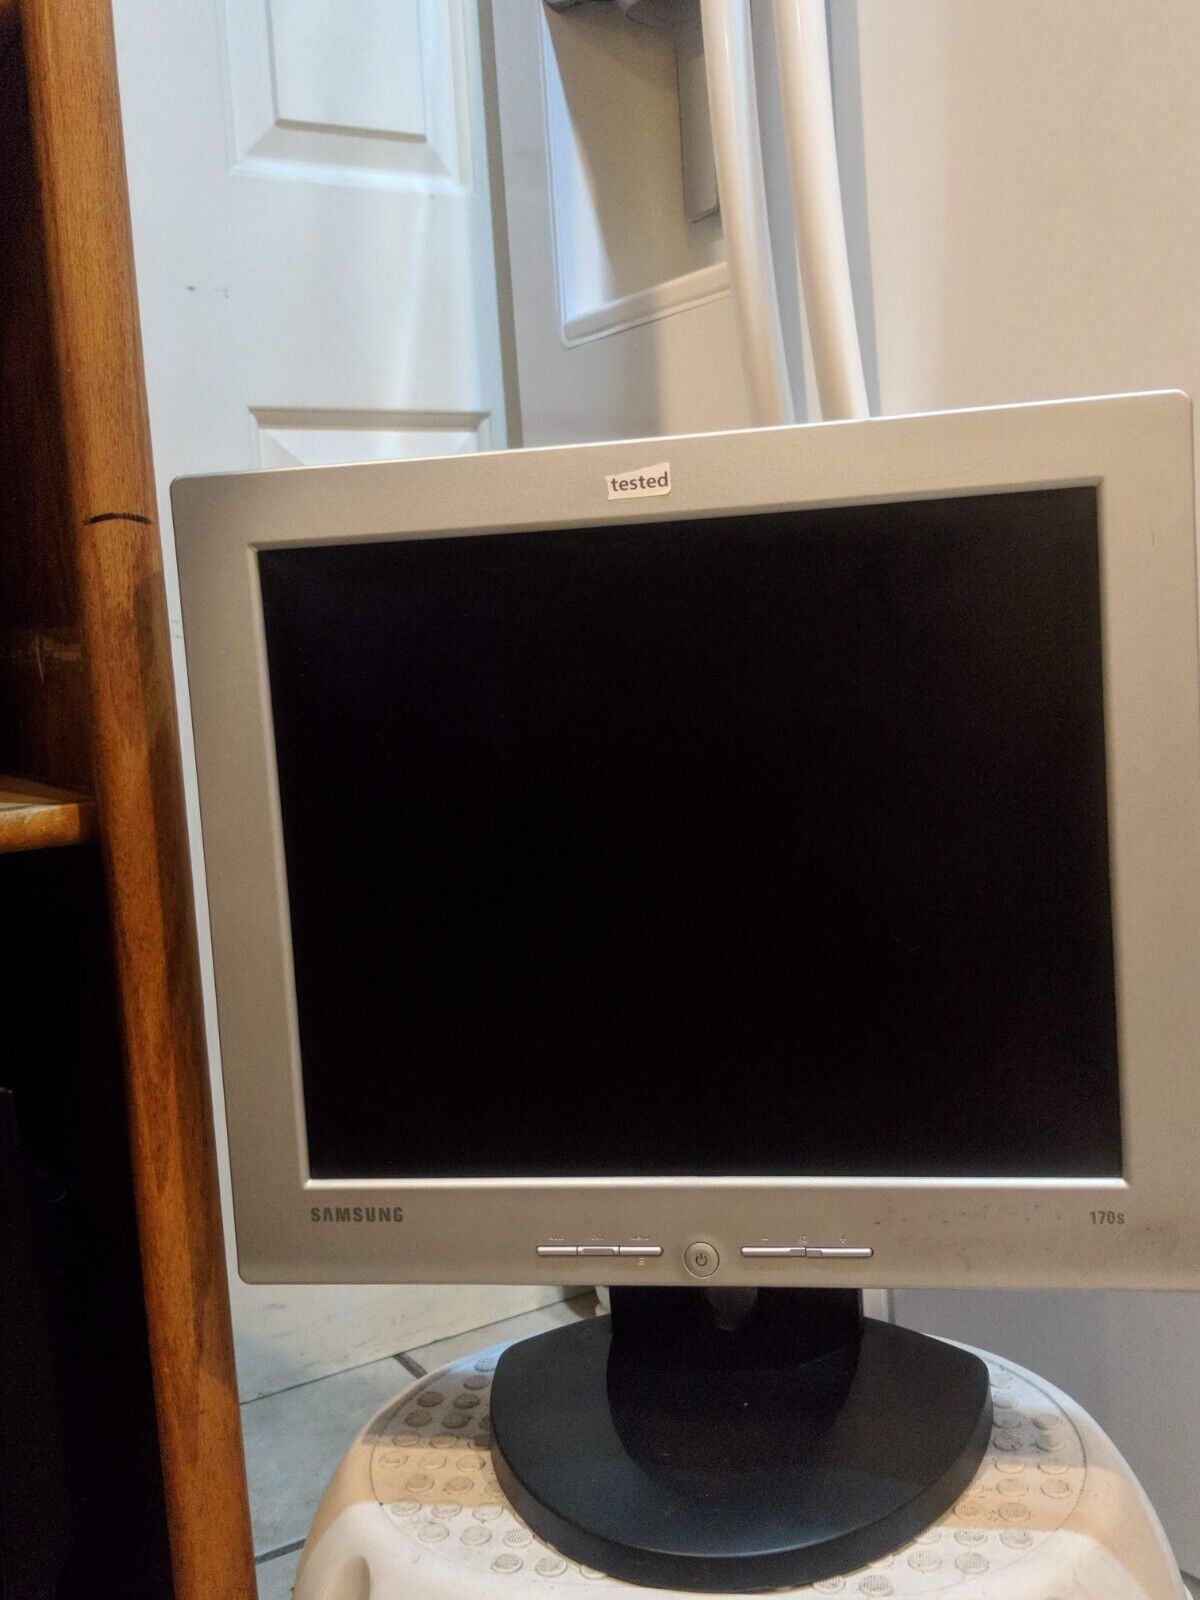 Samsung Syncmaster 170s Flat Screen Monitor TESTED - 00079